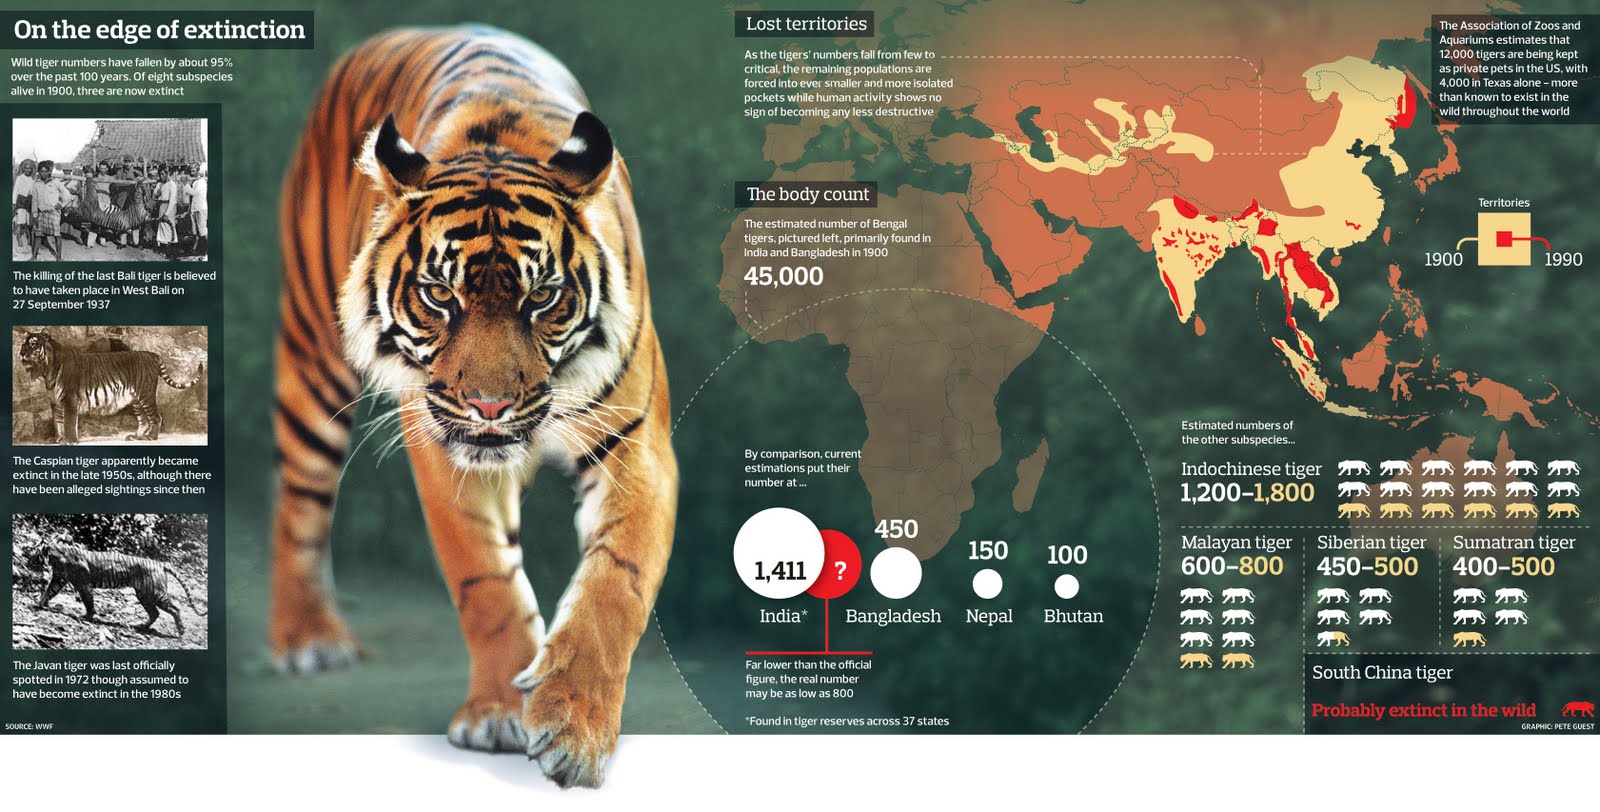 Tigers maybe dangerous, but right now they are on the edge of extinction already. They have lost their territory due to humans ambition. And over the past 100 years, 95% […]